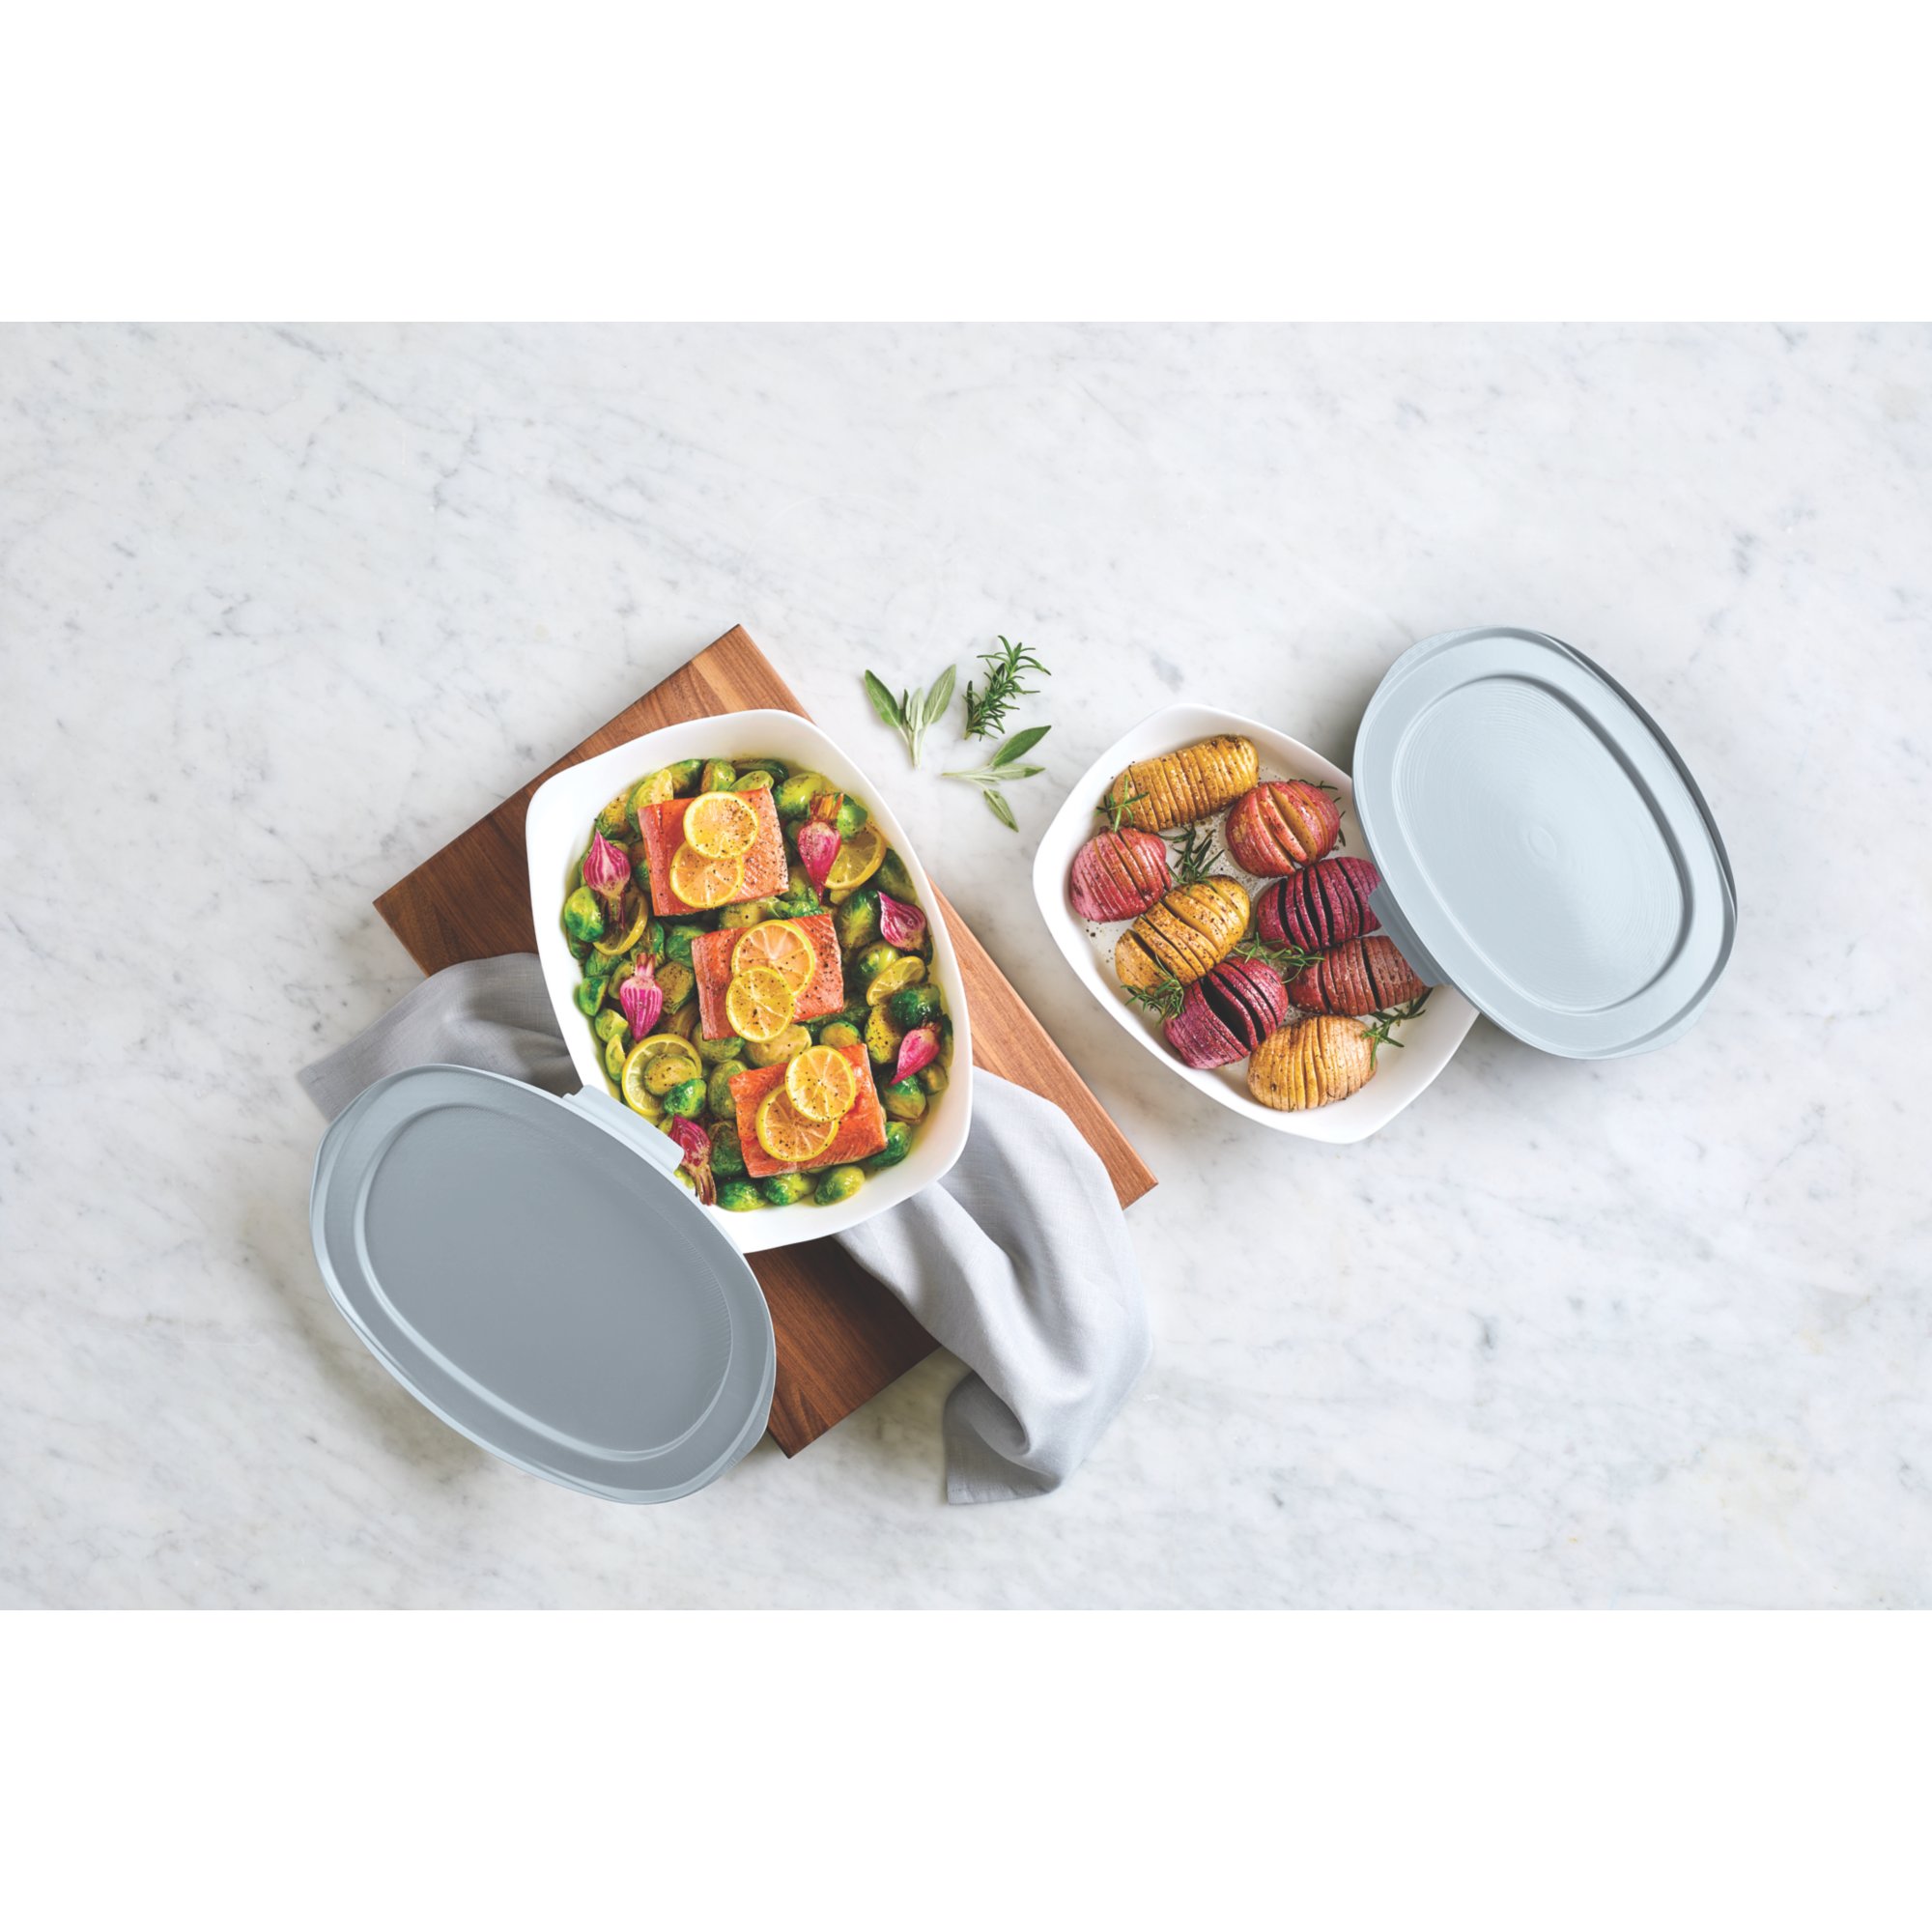 Rubbermaid Glass Baking Dishes for Oven, Casserole Dish Bakeware, DuraLite  4-Piece Set, Square Dishes, White (with Lids)